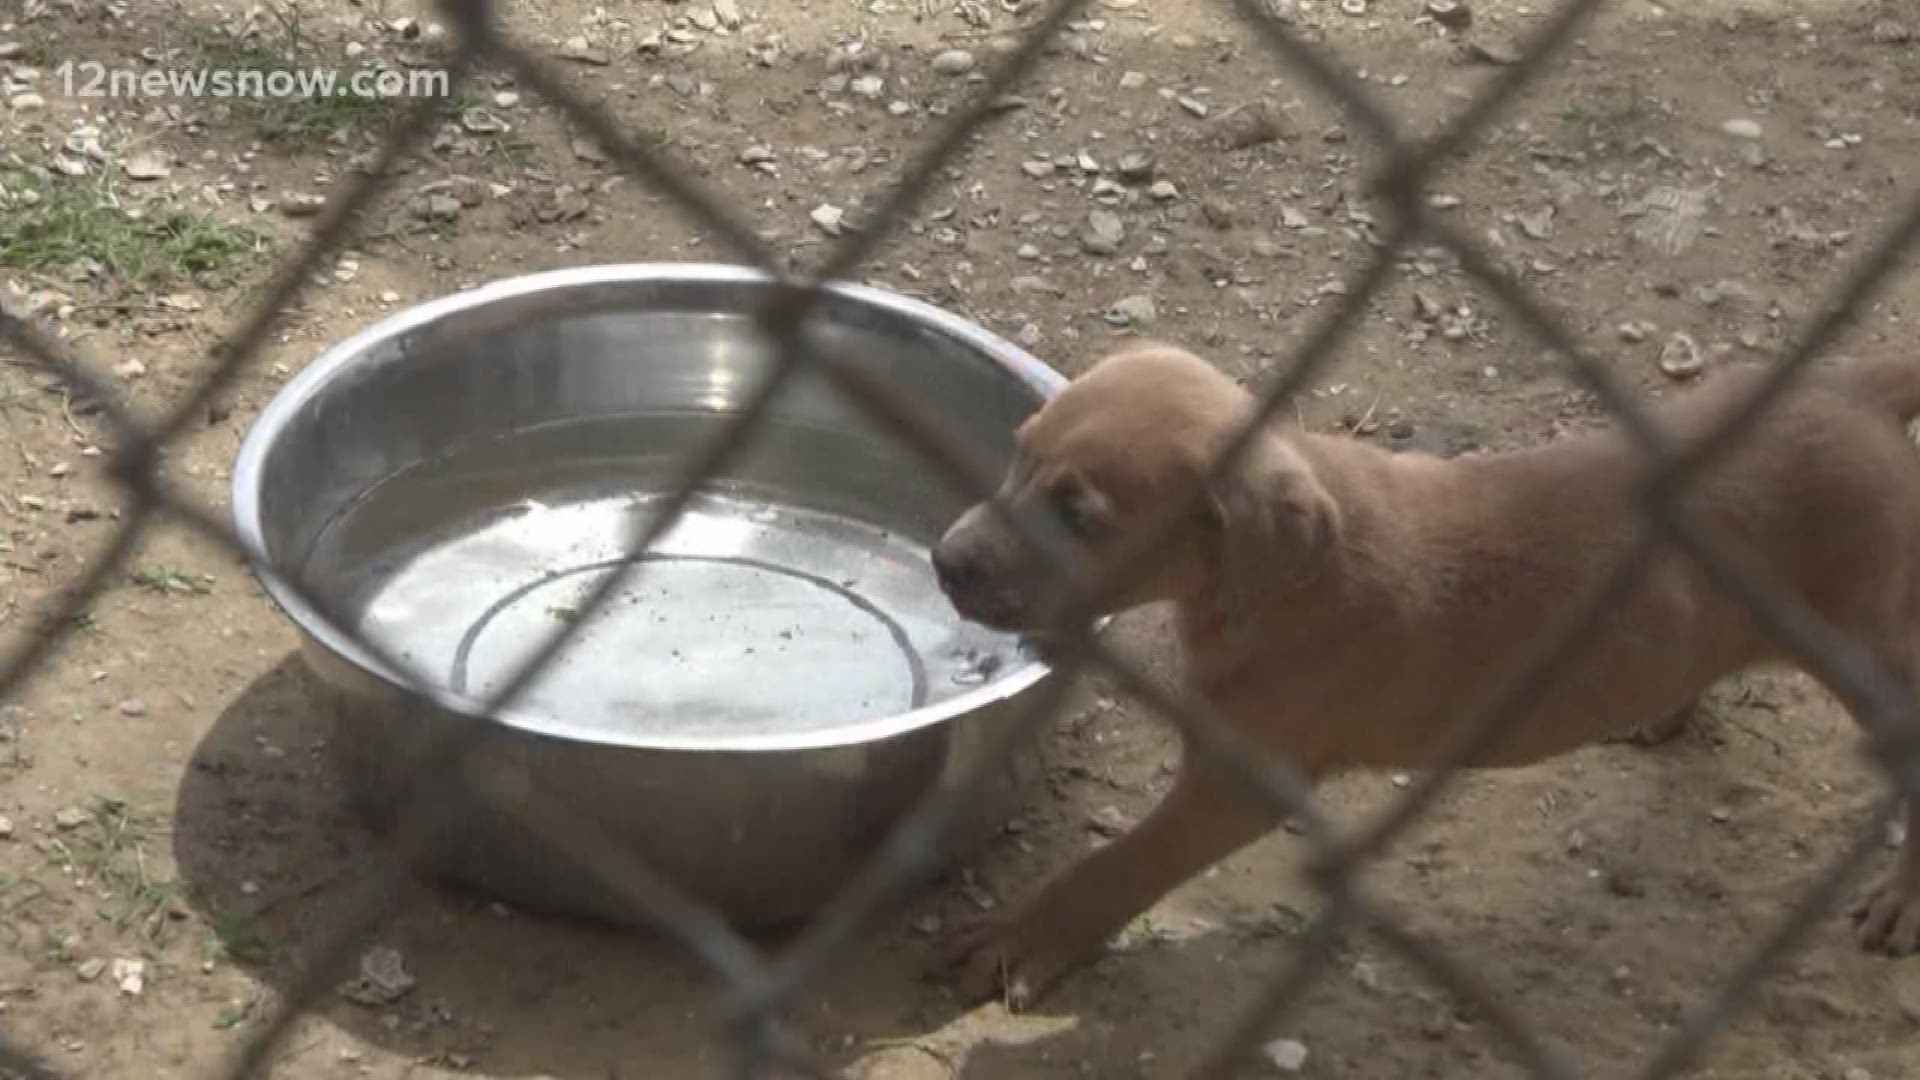 City of Beaumont's animal shelter more than doubles 'live release rate' since 2014